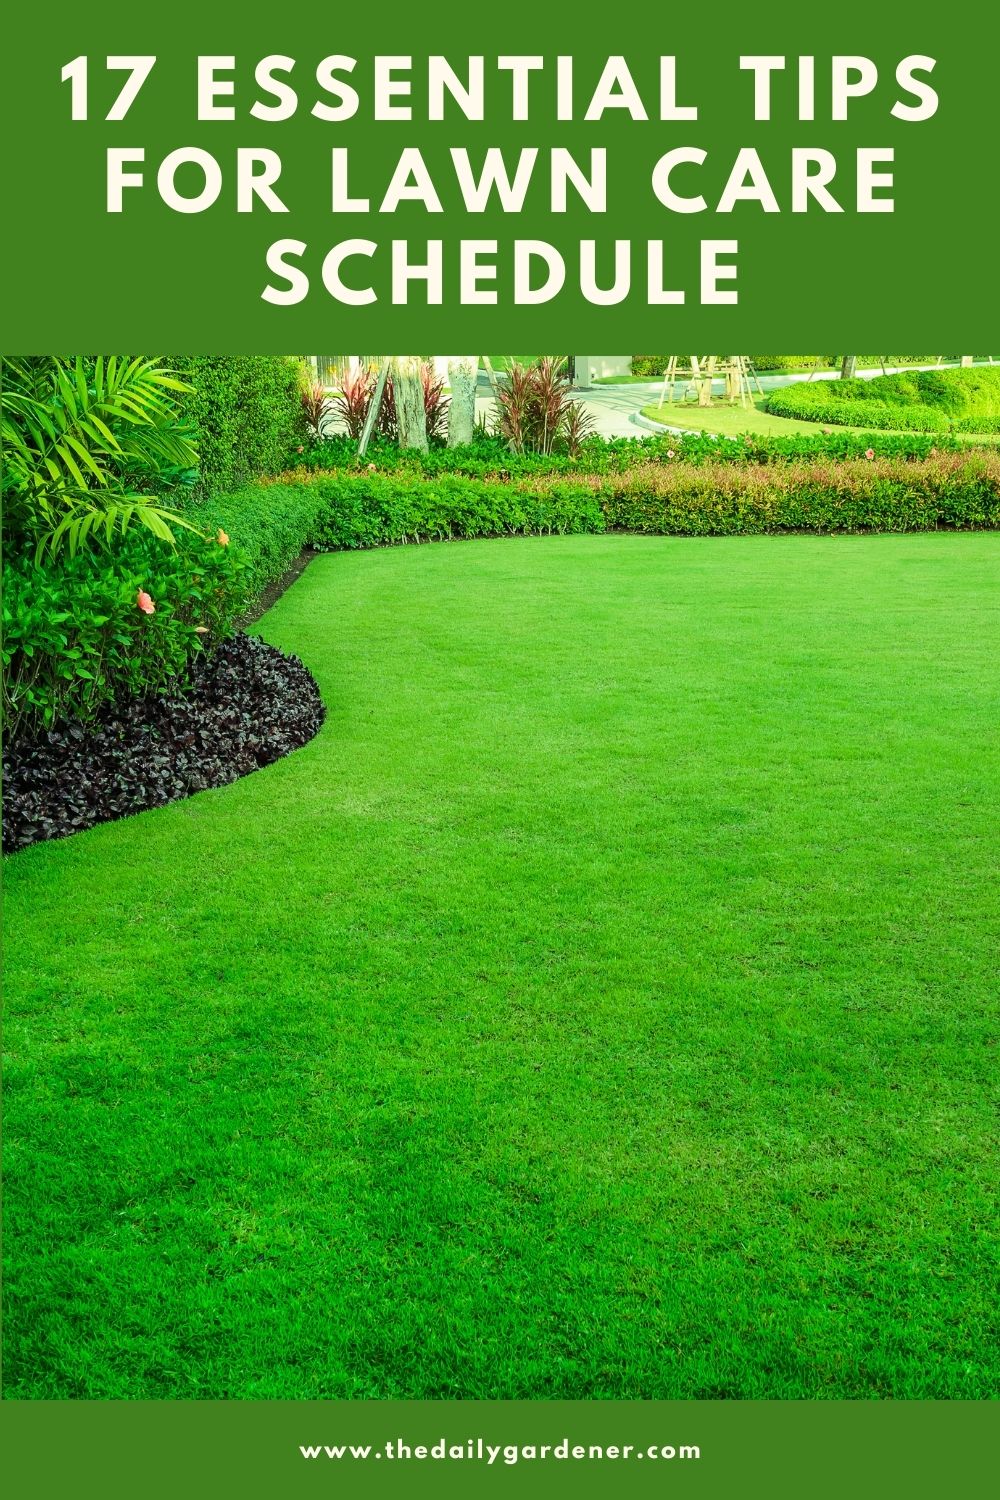 17 Essential Tips for Lawn Care Schedule 1